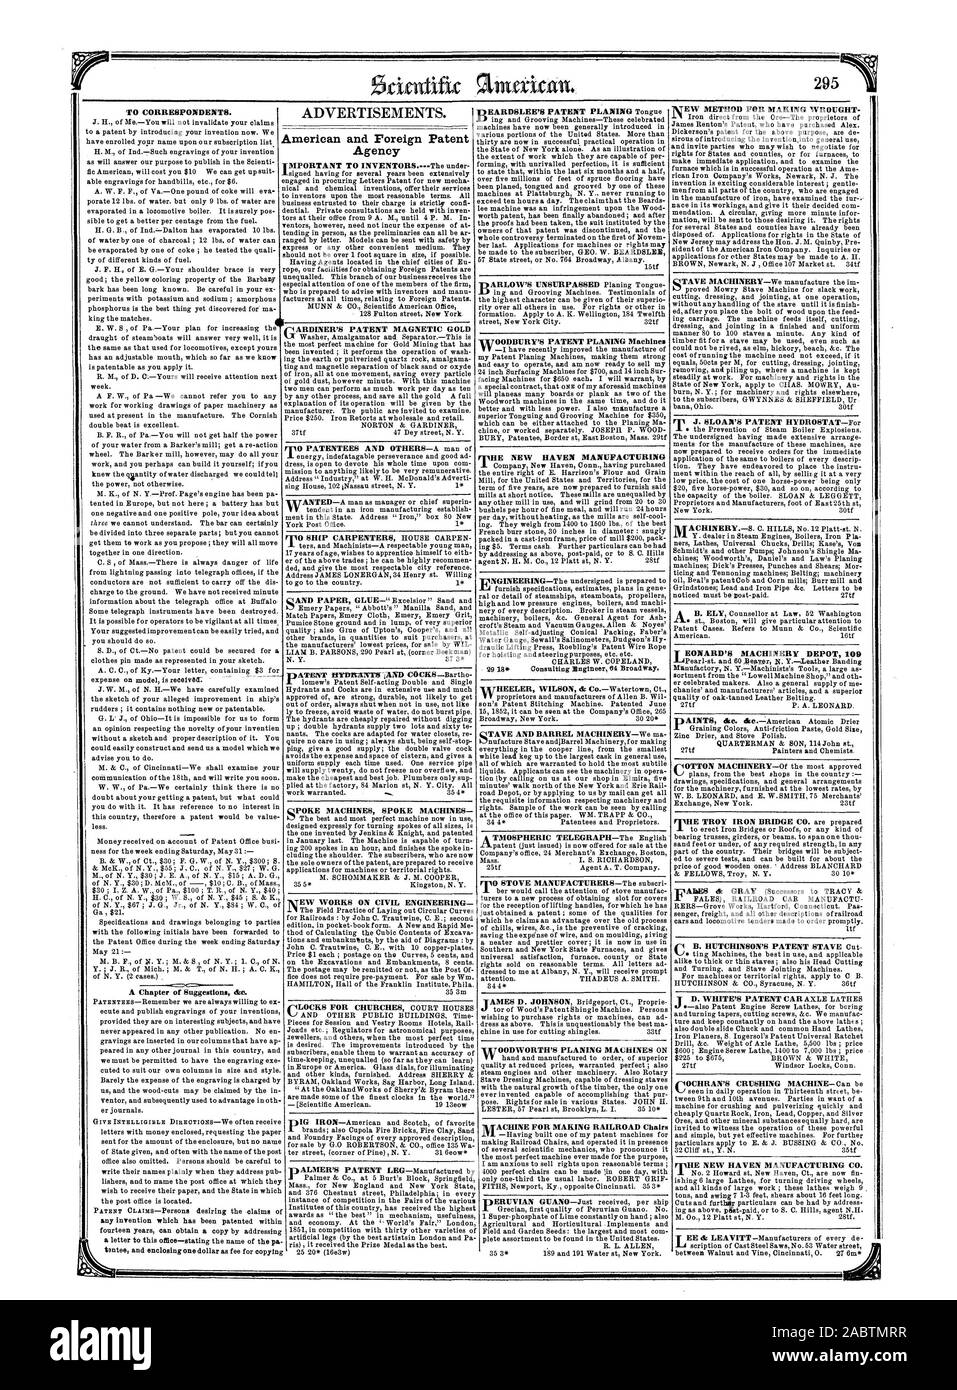 TO CORRESPONDENTS. A Chapter of Suggestions dro. AD American and Foreign Patent Agency j EONARD'S MACHINERY DEPOT 109 MHE NEW HAVEN MANUFACTURING CO. lATOODBURY'S PATENT PLANING Machine., scientific american, 1853-05-28 Stock Photo